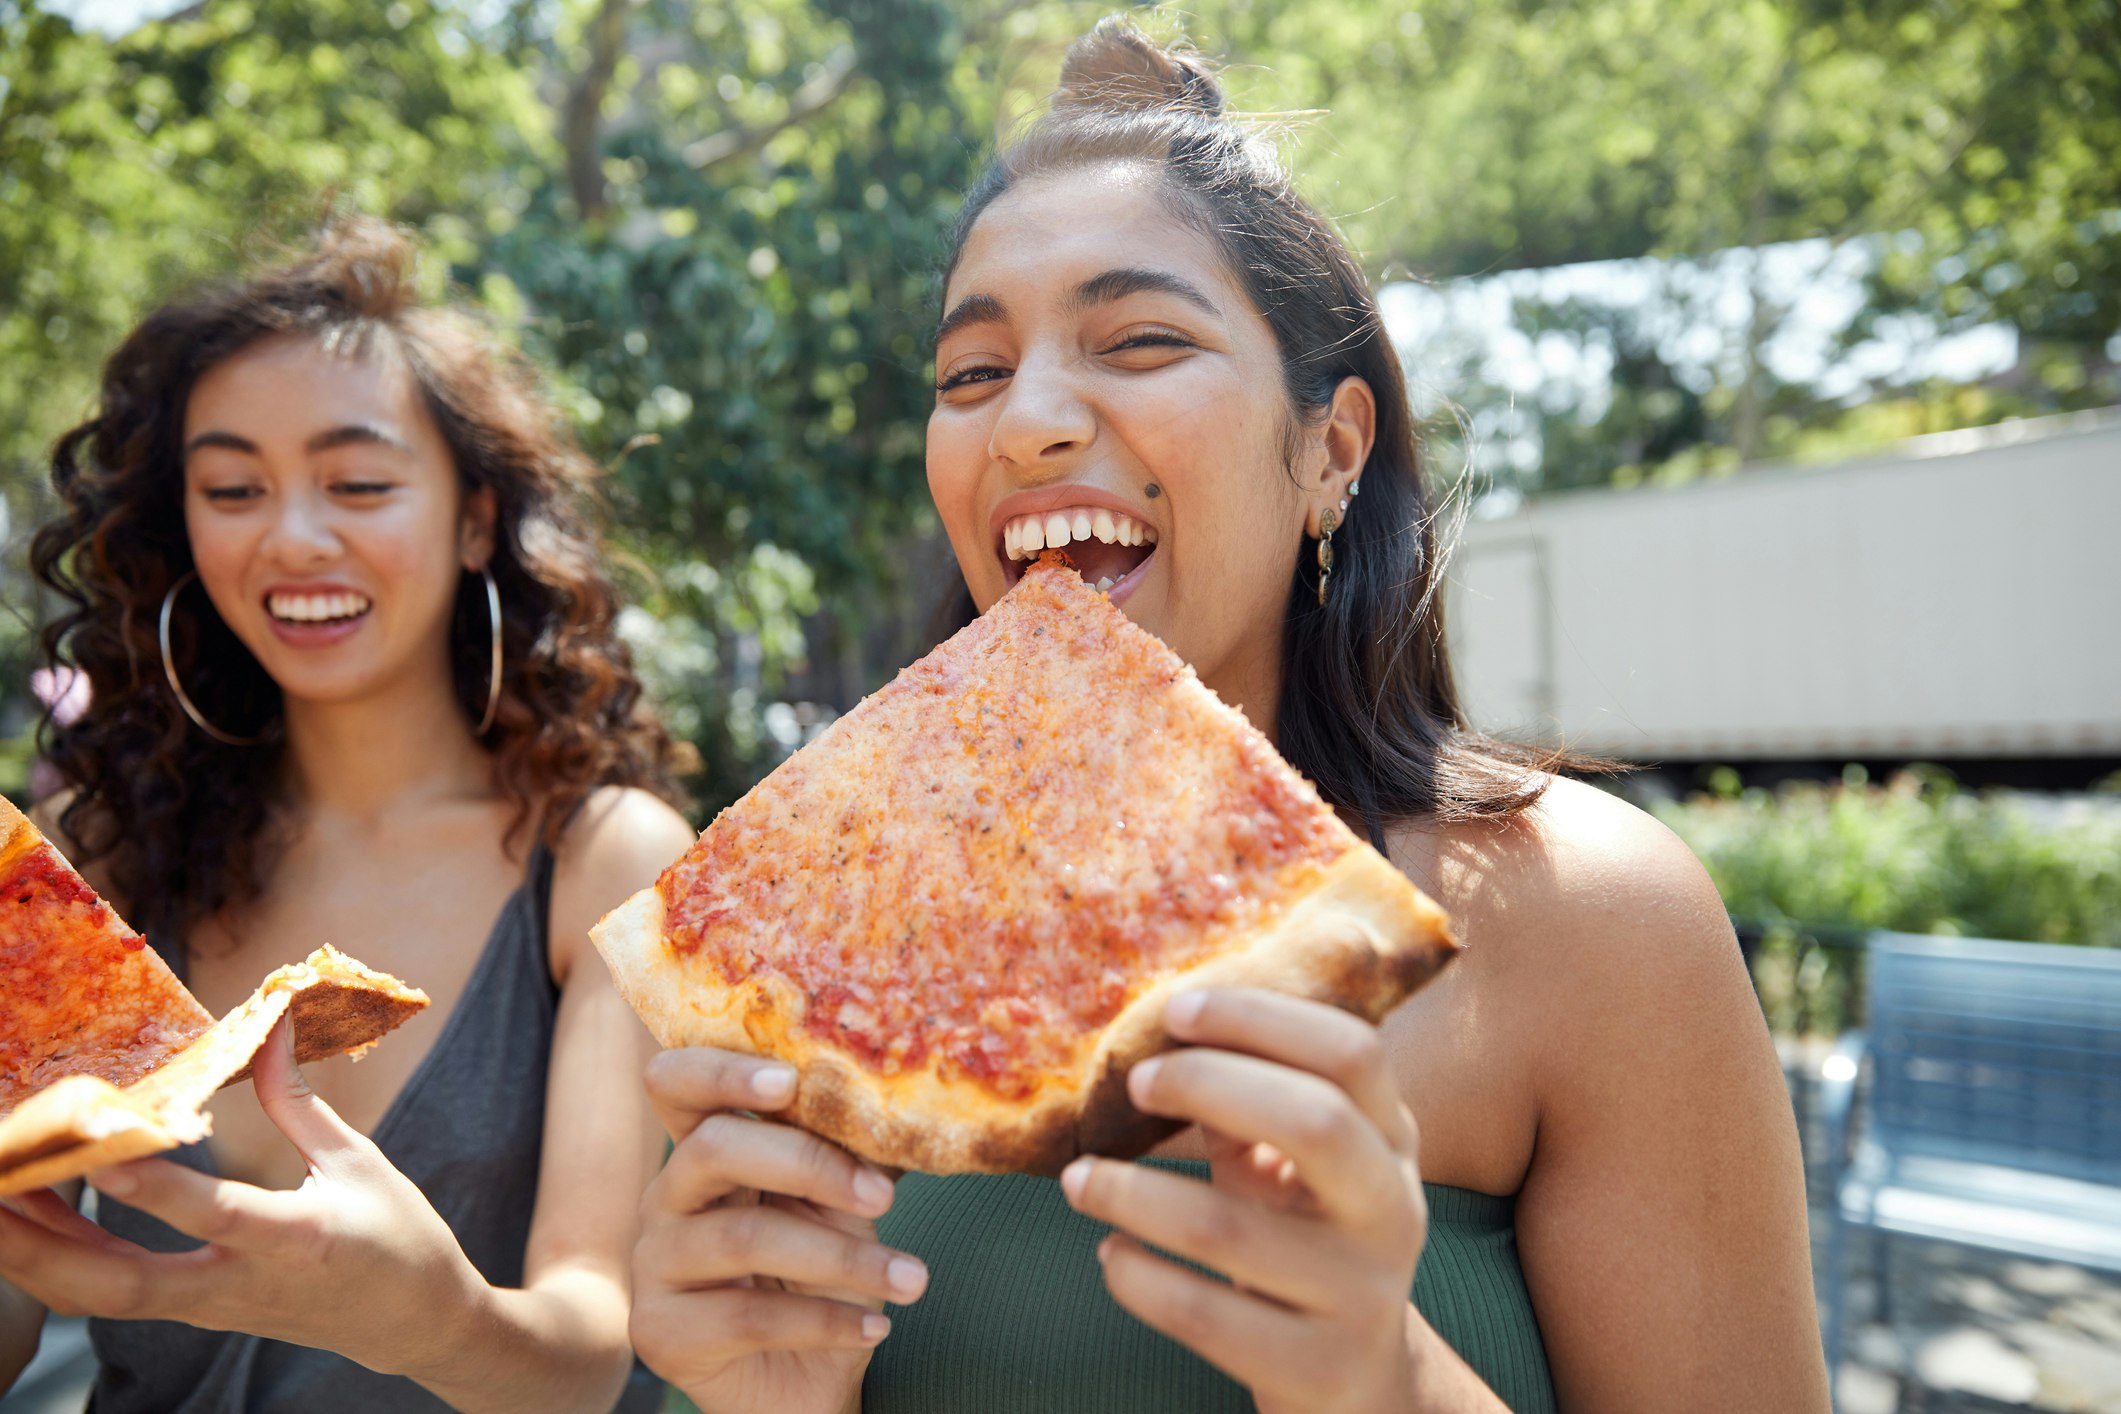 Young females hanging out in city eating pizza